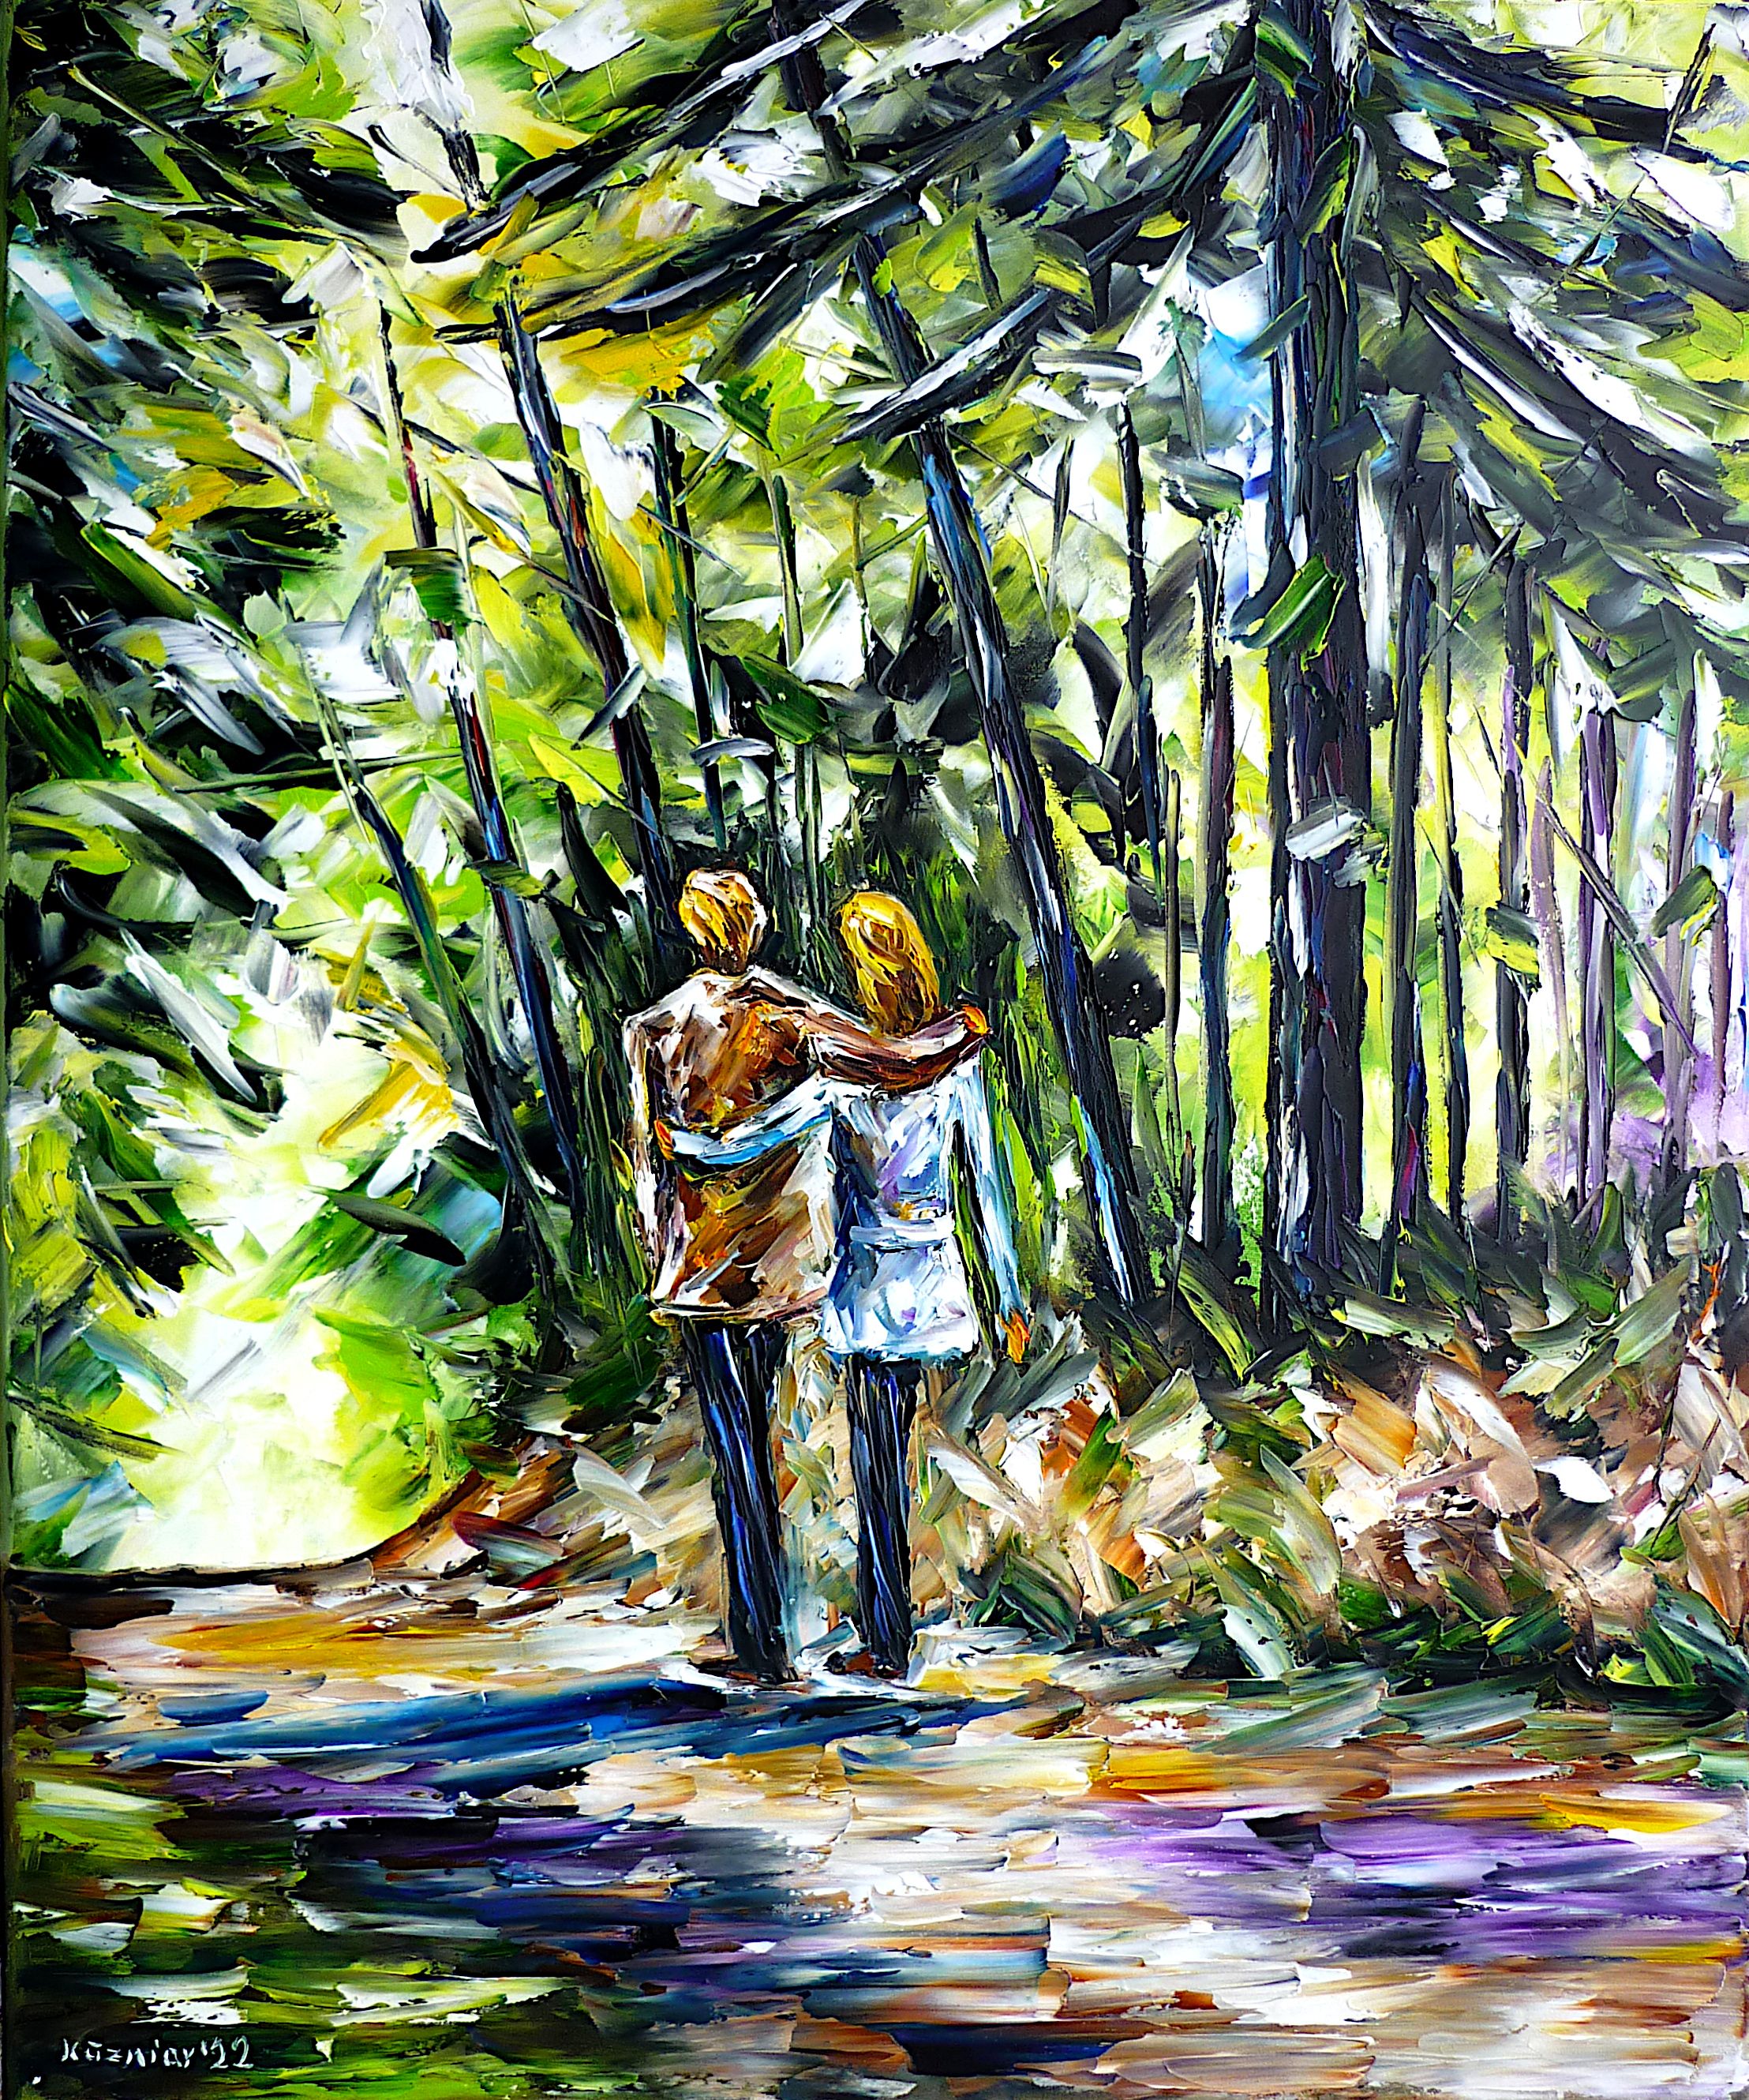 people in love,couple in love,loving couple taking a walk,love scene,romantic scene,love and romance,romantic picture,romantic painting,walking in the forest,people in the forest,forest painting,people in the green,landscape painting,people in the countryside,in the nature,i love you,green colors,green painting,man and woman,walk in the forest,embracing,loving couple hugging,forest path,forest walk,summer colors,summer picture,summer painting,forest in summer,summer walk,people in summer,loving couple in summer,summer feelings,summer love,genre painting,palette knife oil painting,modern art,impressionism,expressionism,abstract painting,lively colors,colorful painting,bright colors,light reflections,impasto painting,figurative painting